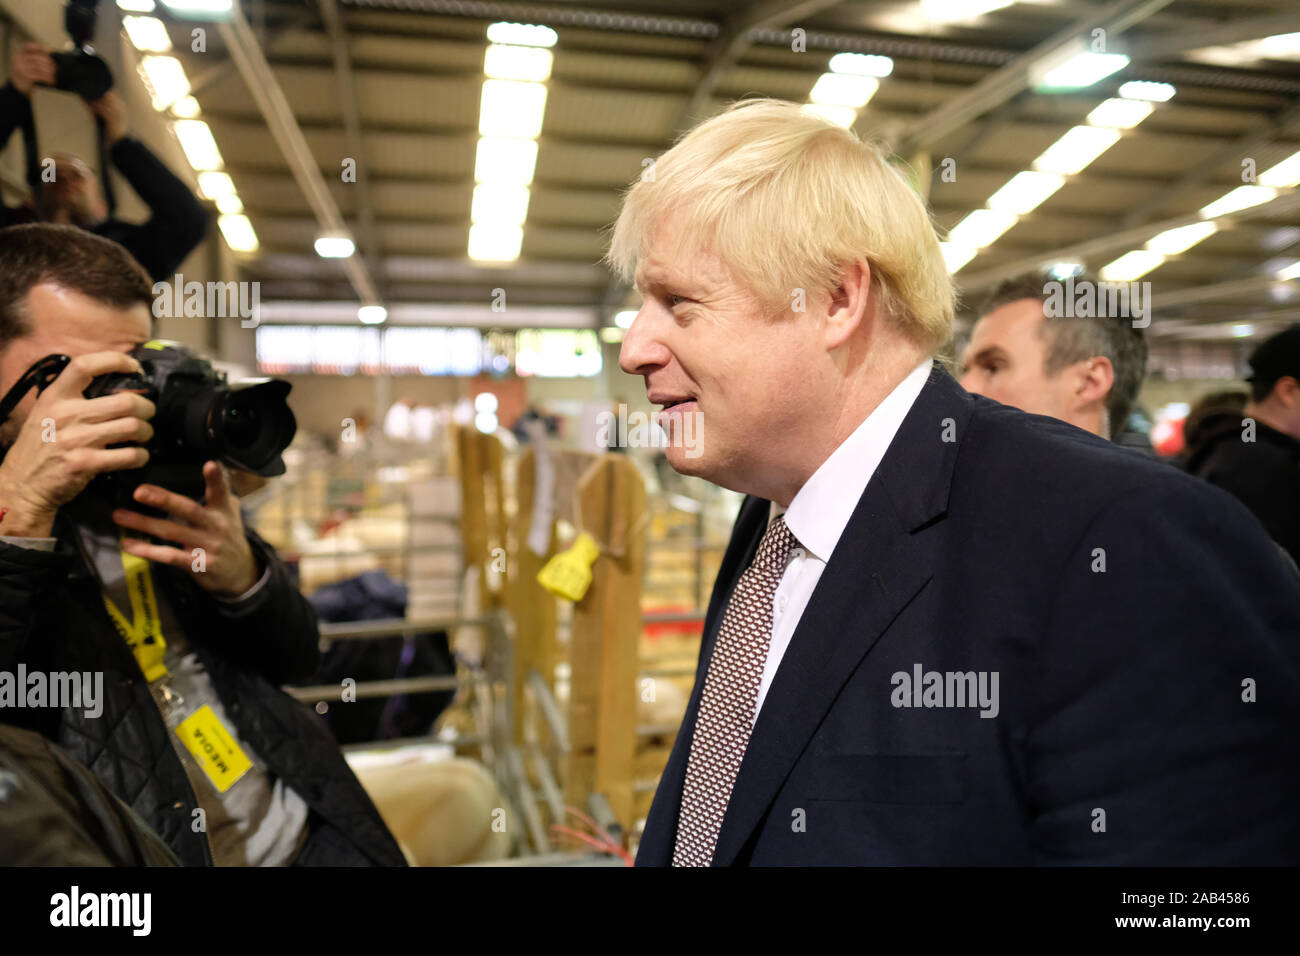 Royal Welsh Winter Fair, Builth Wells, Powys, Wales, UK - Monday 25th November 2019 - Prime Minister Boris Johnson tours the Royal Welsh Winter Fair on the latest stage of his UK Election tour meeting the farming and rural community in Mid Wales. Credit: Steven May/Alamy Live News Stock Photo